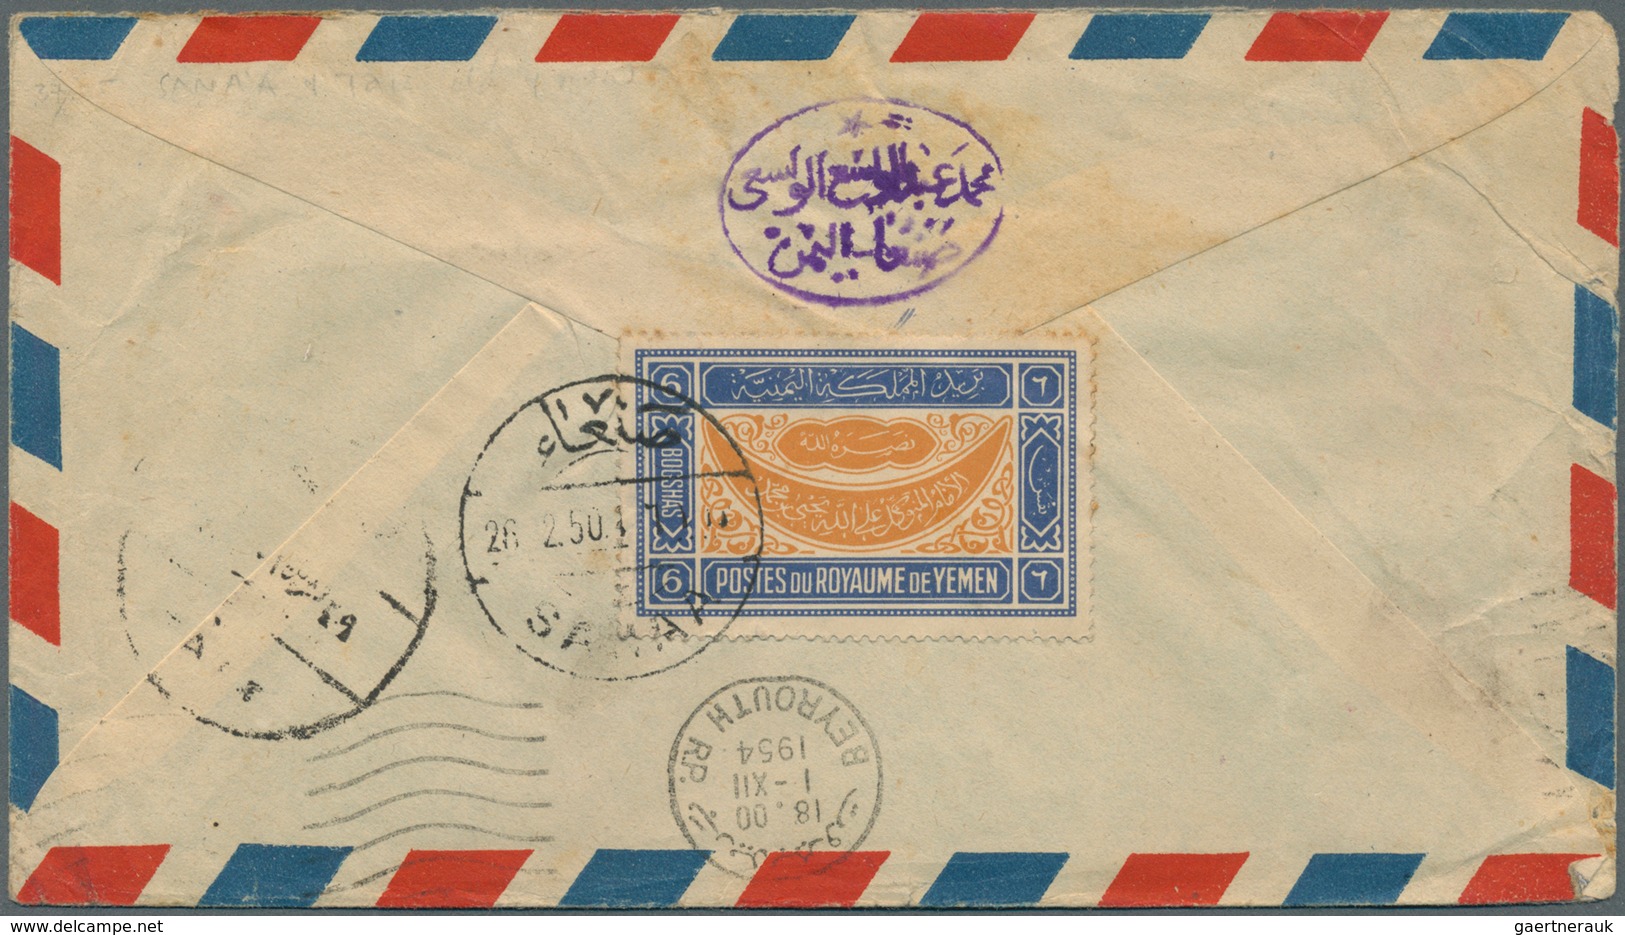 Jemen: 1950/1965 (ca.), assortment of 55 covers, apparently mainly commercial mail (postal wear/impe